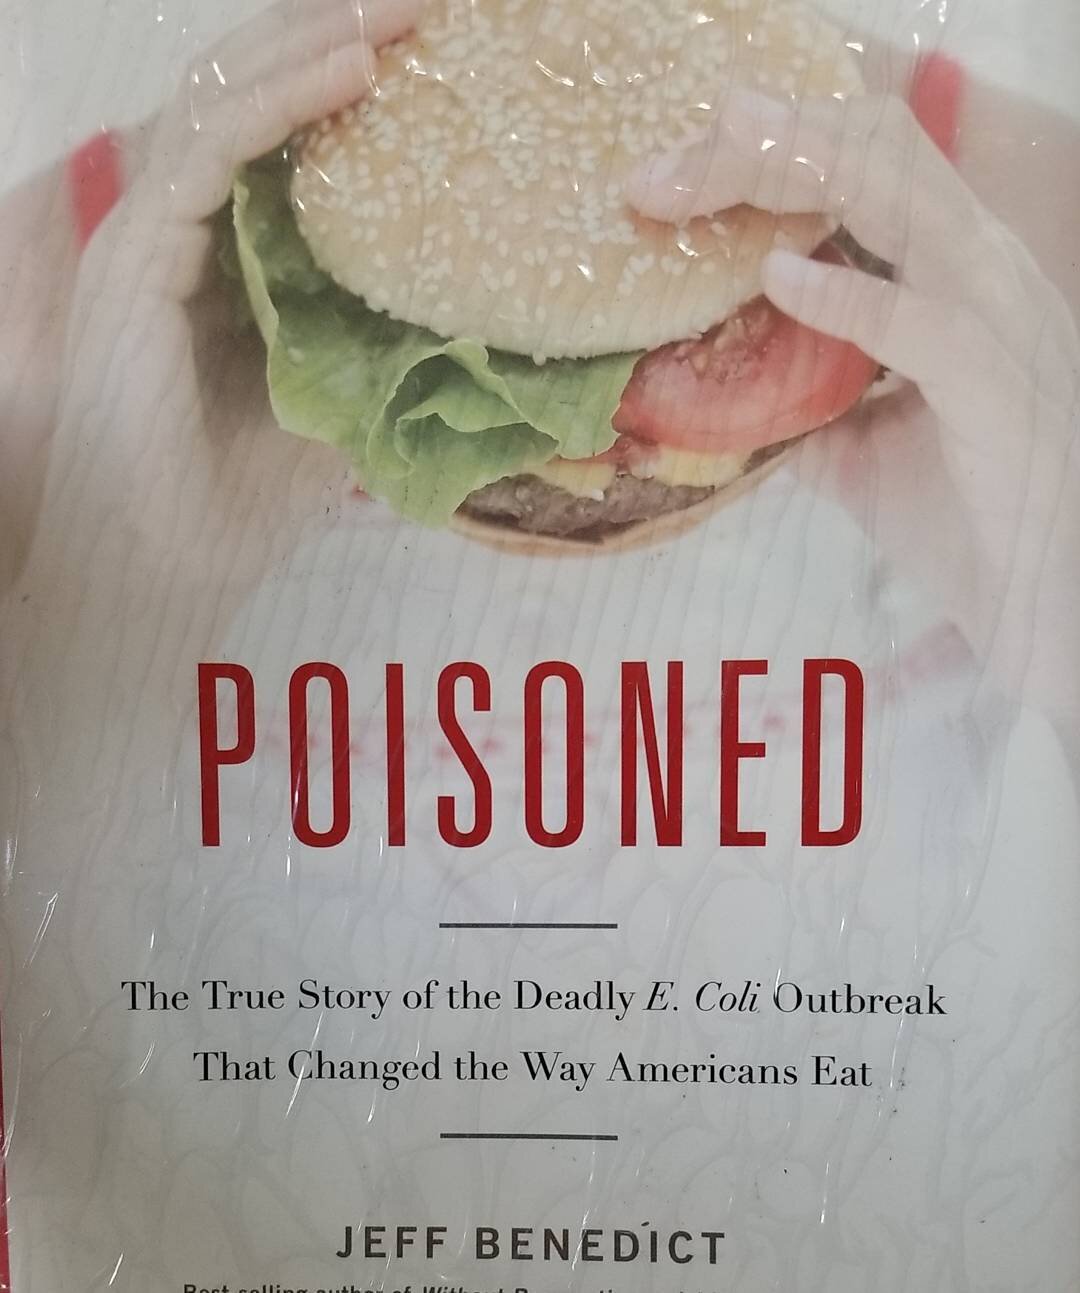 Reading all about the #poisoned story from #jackinthebox #baconenk #ecoli #nerd #culinary